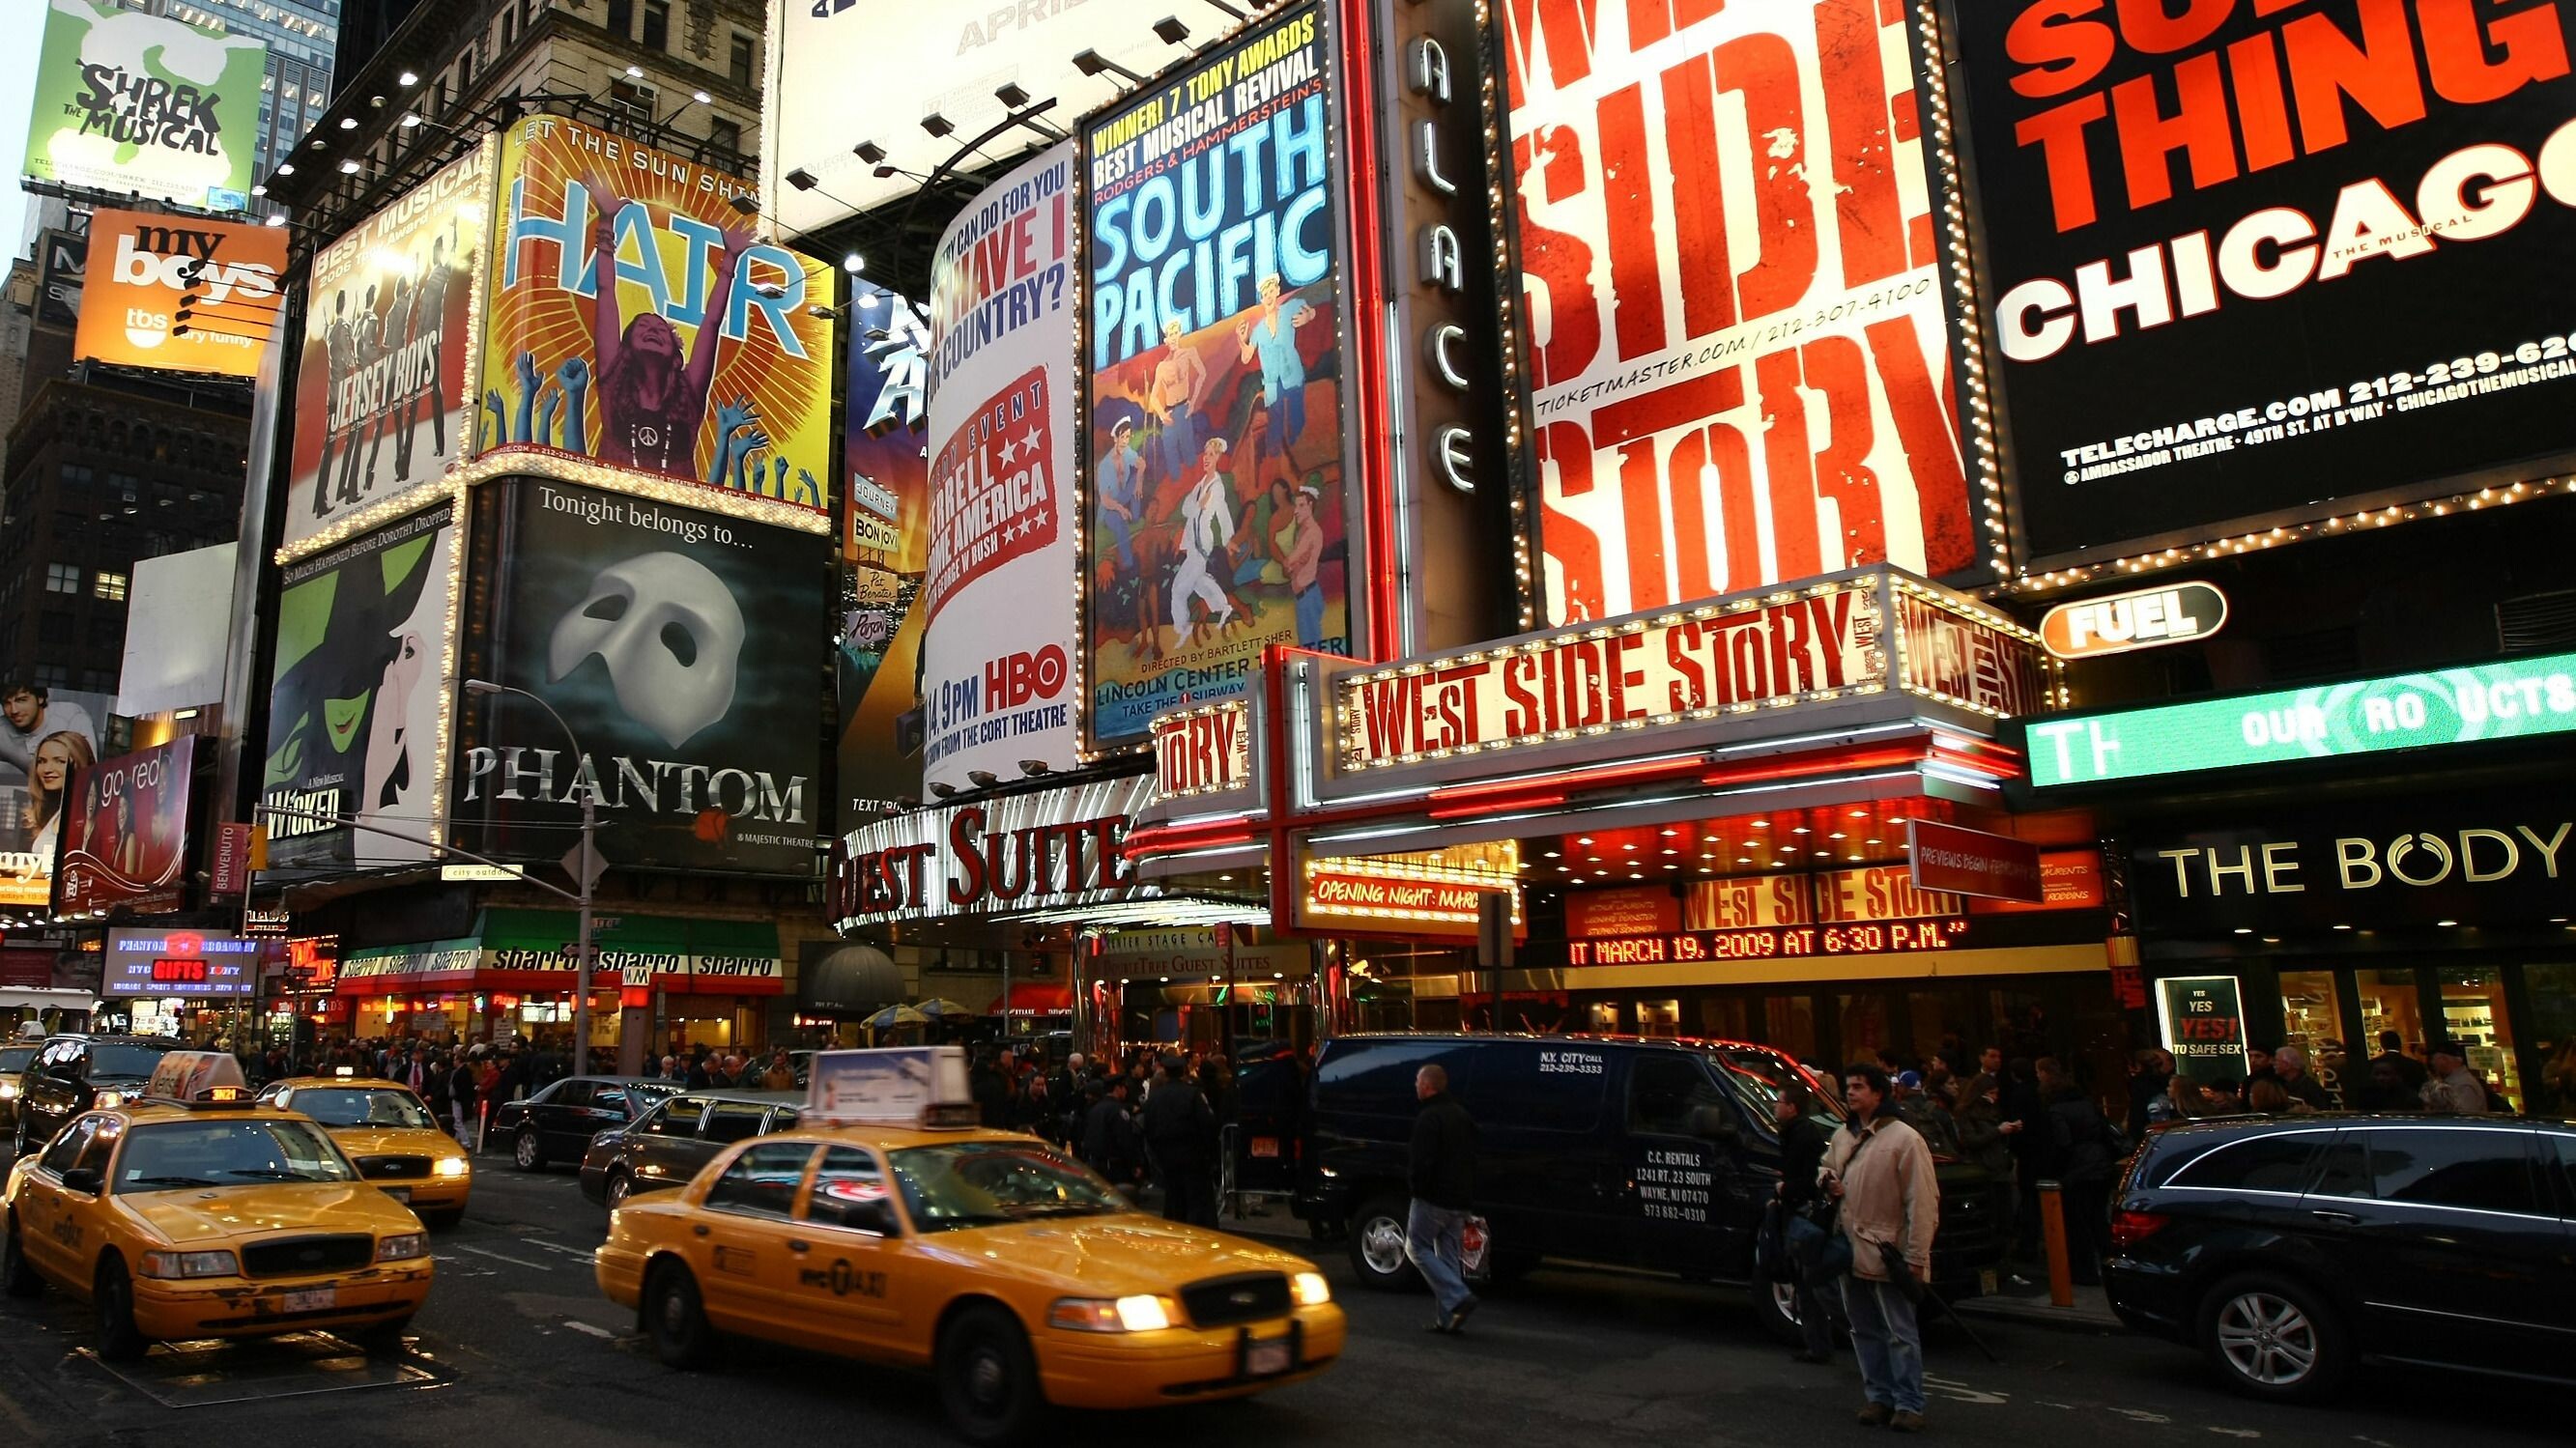 Broadway Wallpaper: HD, 4K, 5K for PC and Mobile. Download free image for iPhone, Android